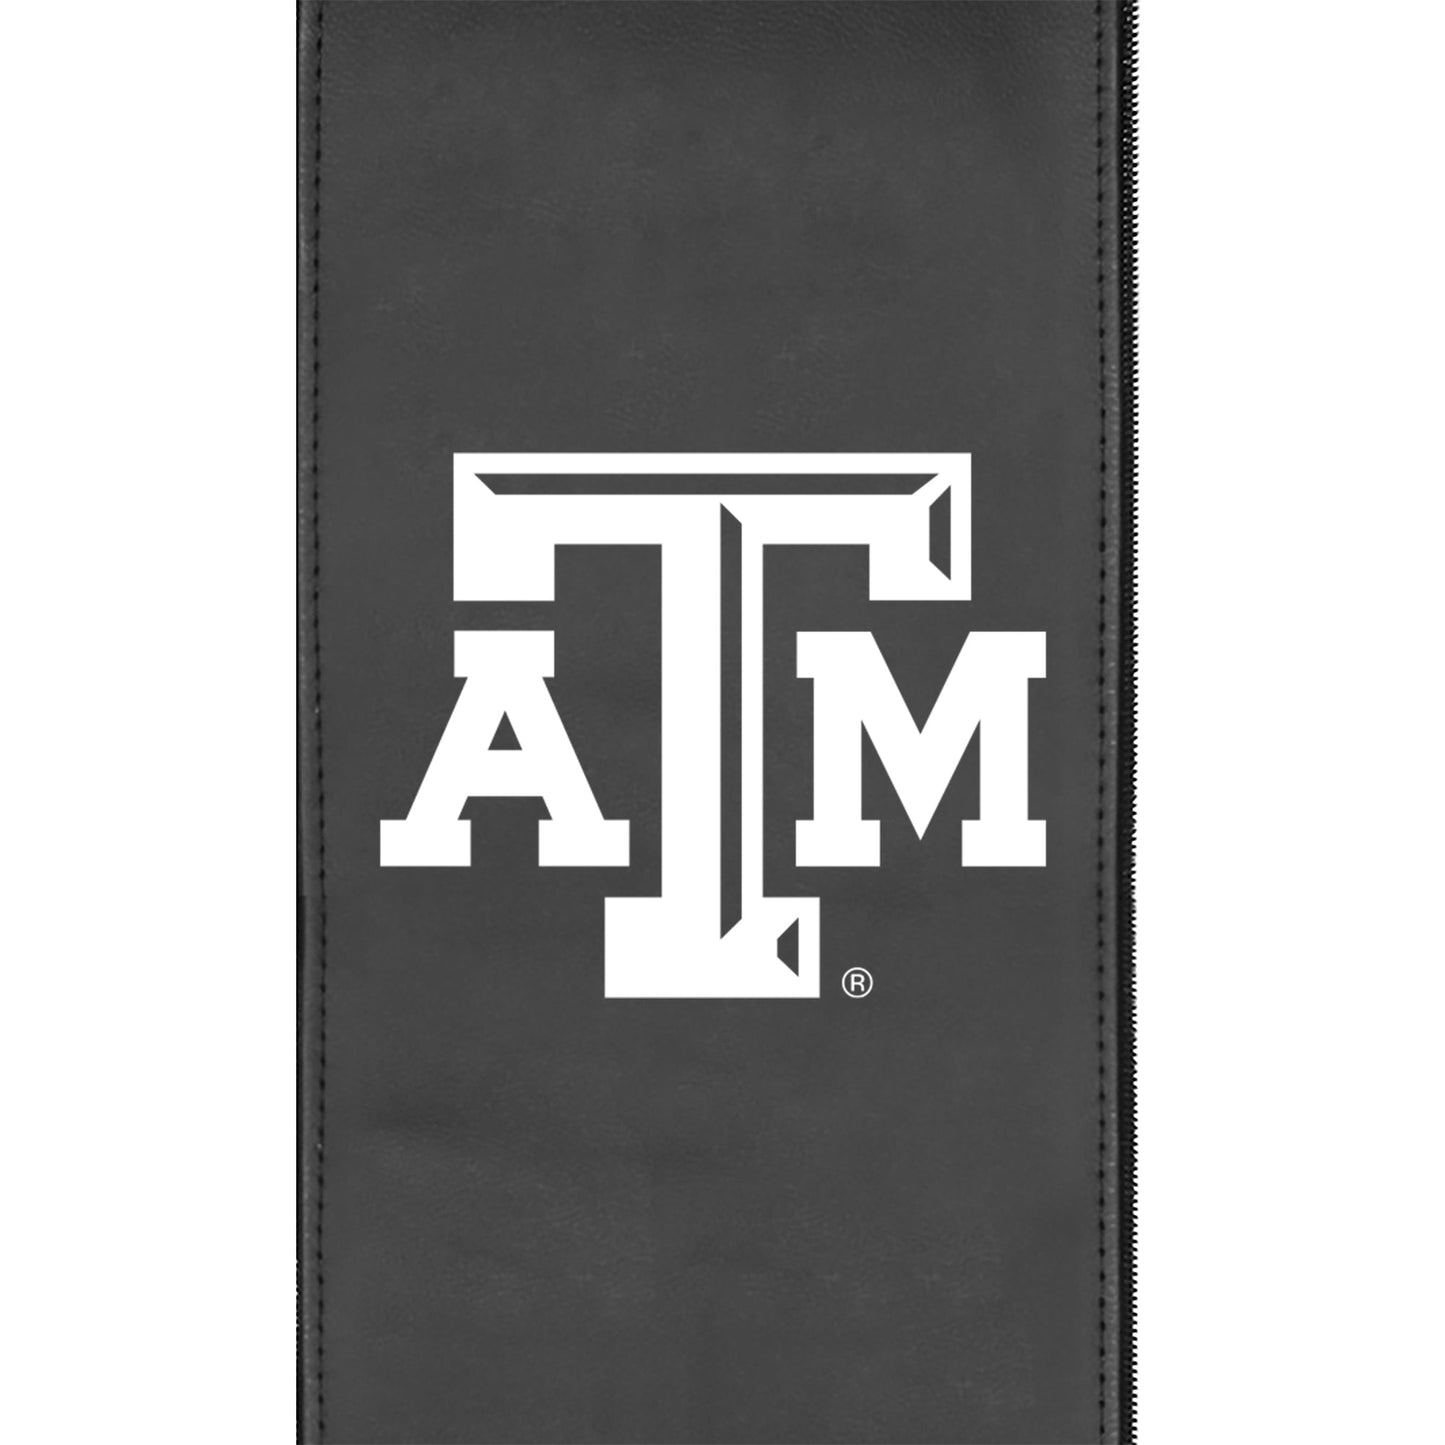 Stealth Power Plus Recliner with Texas A&M Aggies Primary Logo